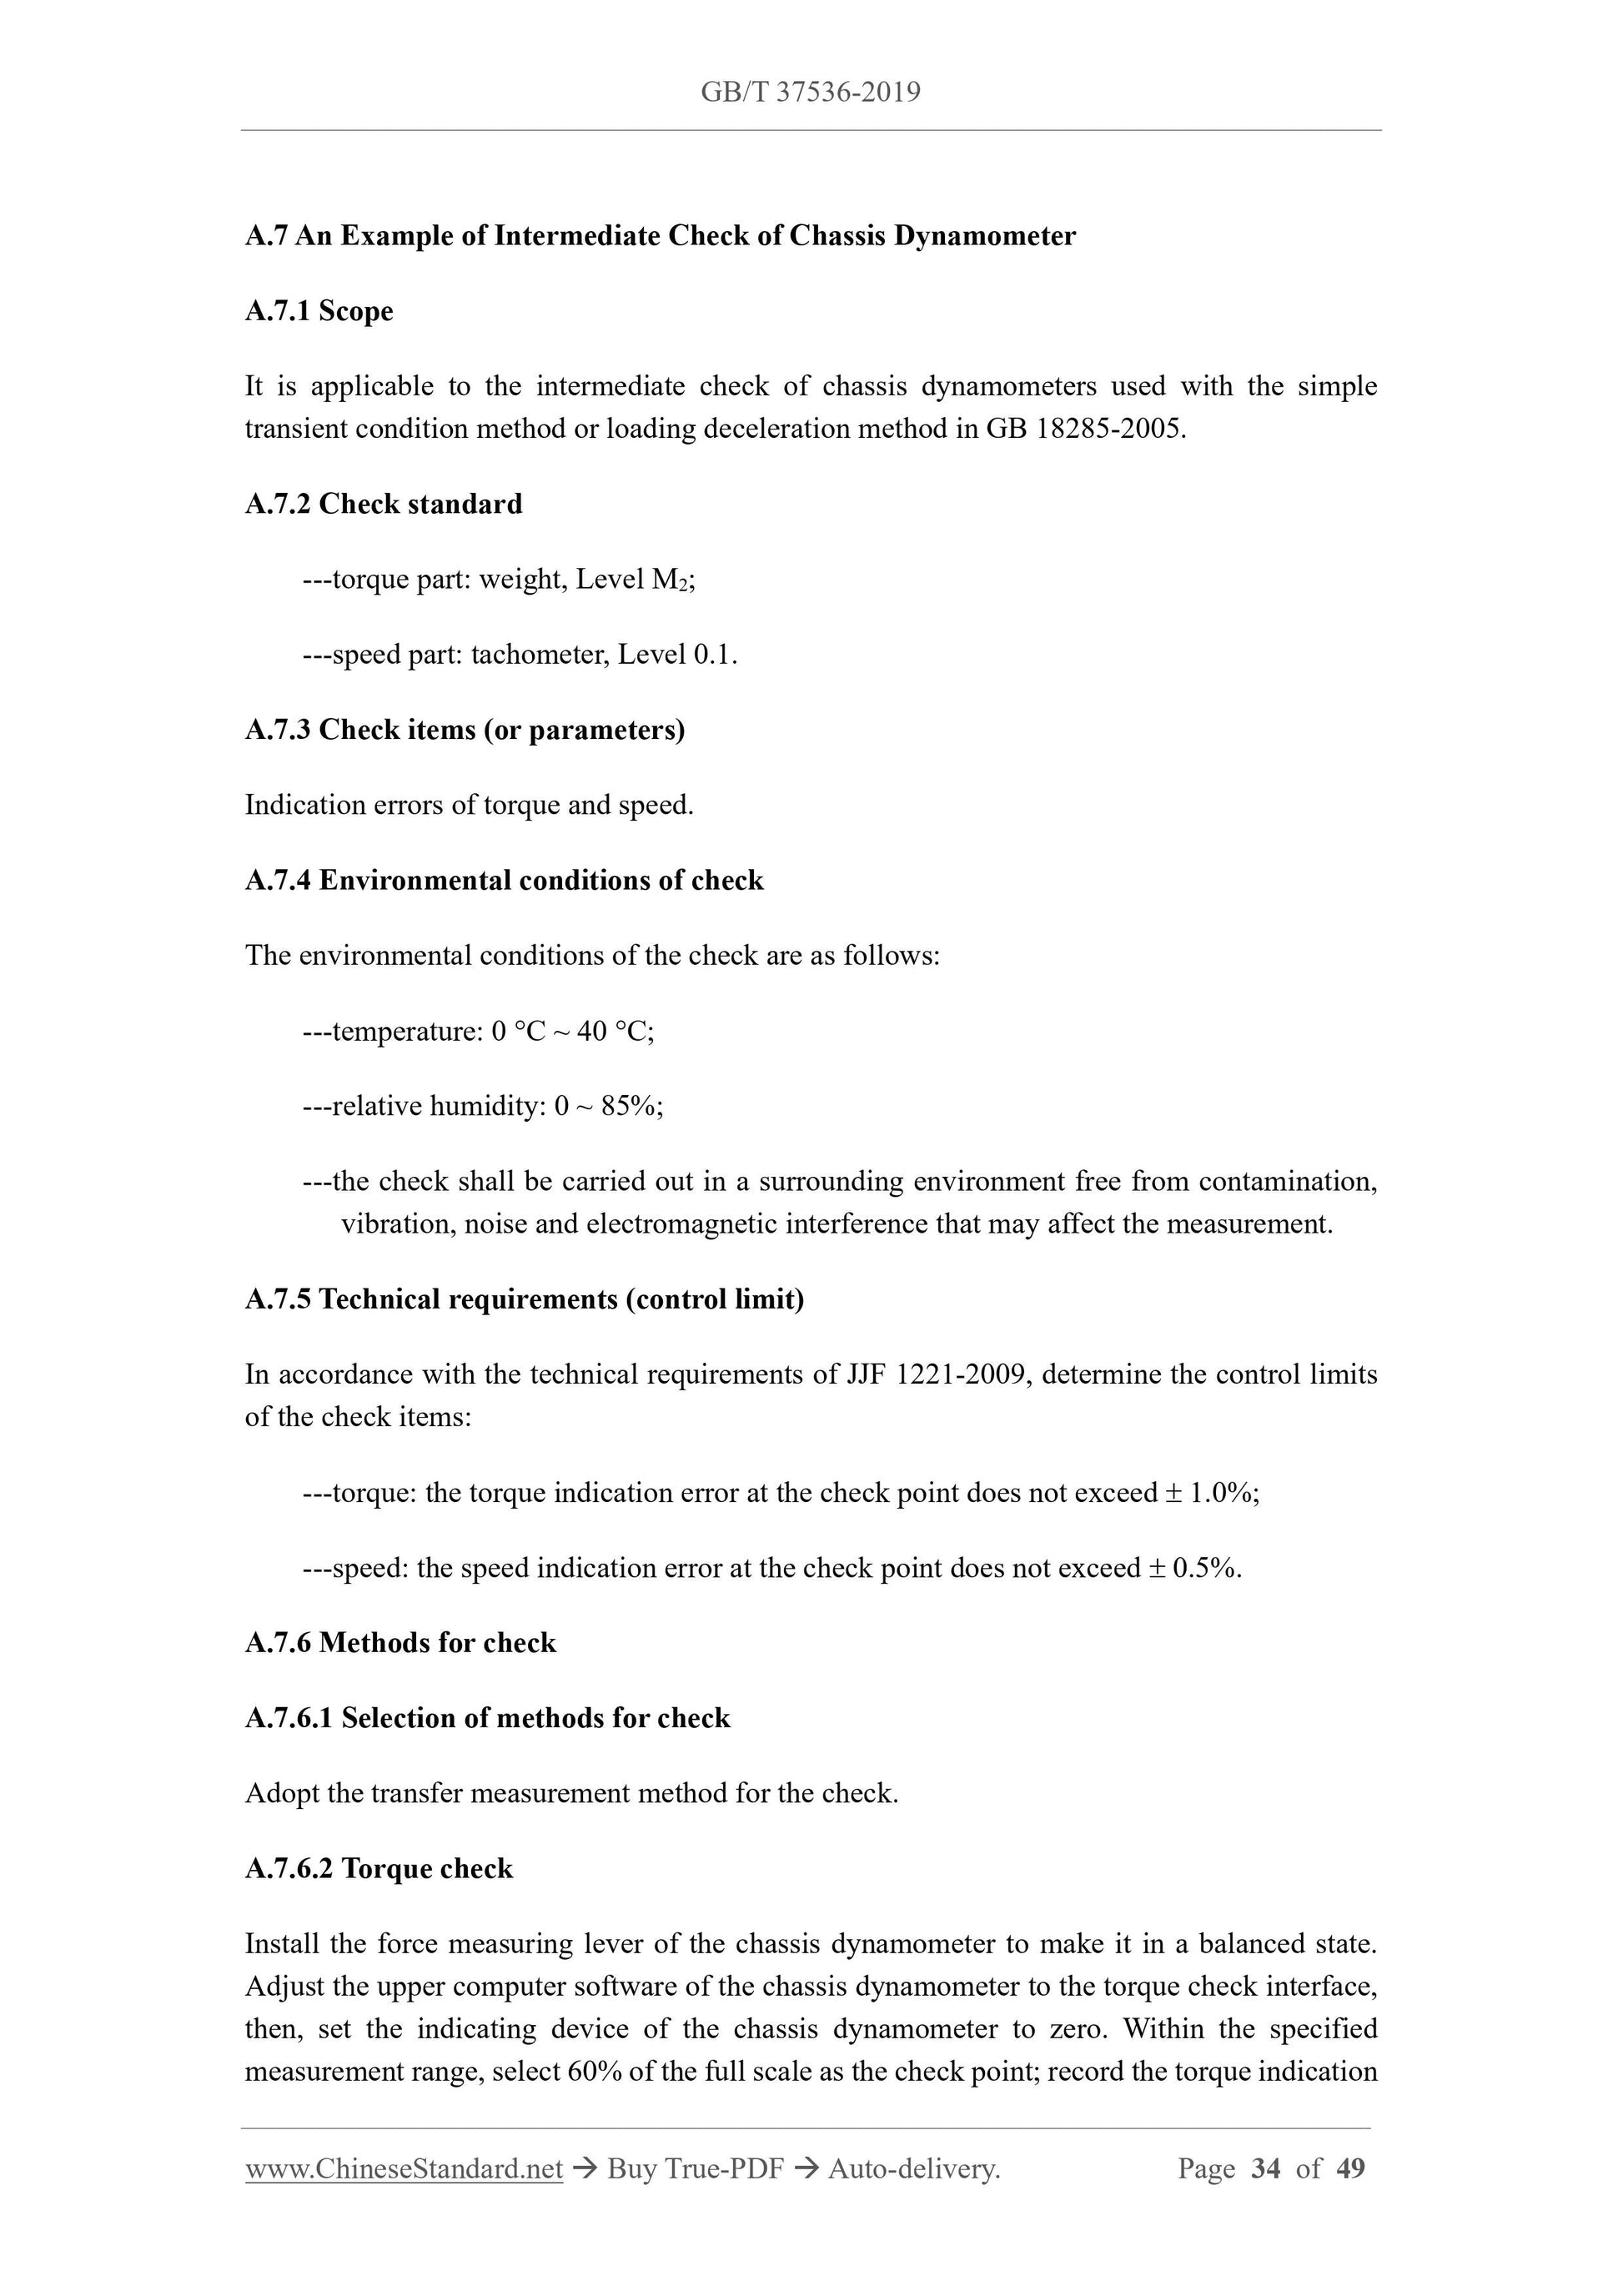 GB/T 37536-2019 Page 12